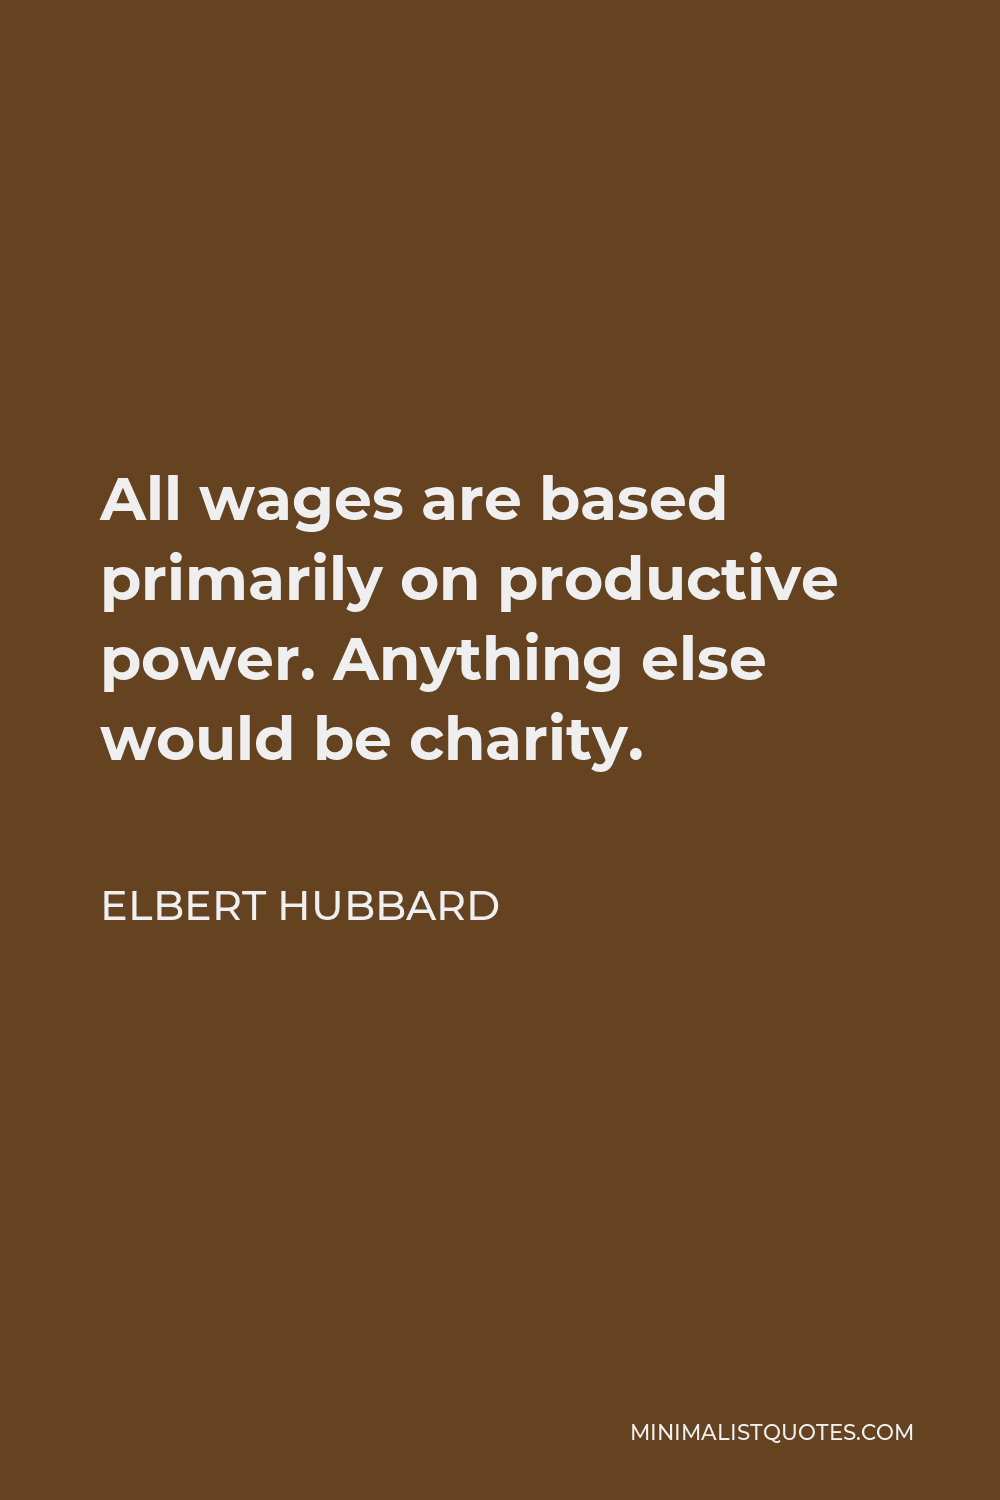 Elbert Hubbard Quote - All wages are based primarily on productive power. Anything else would be charity.